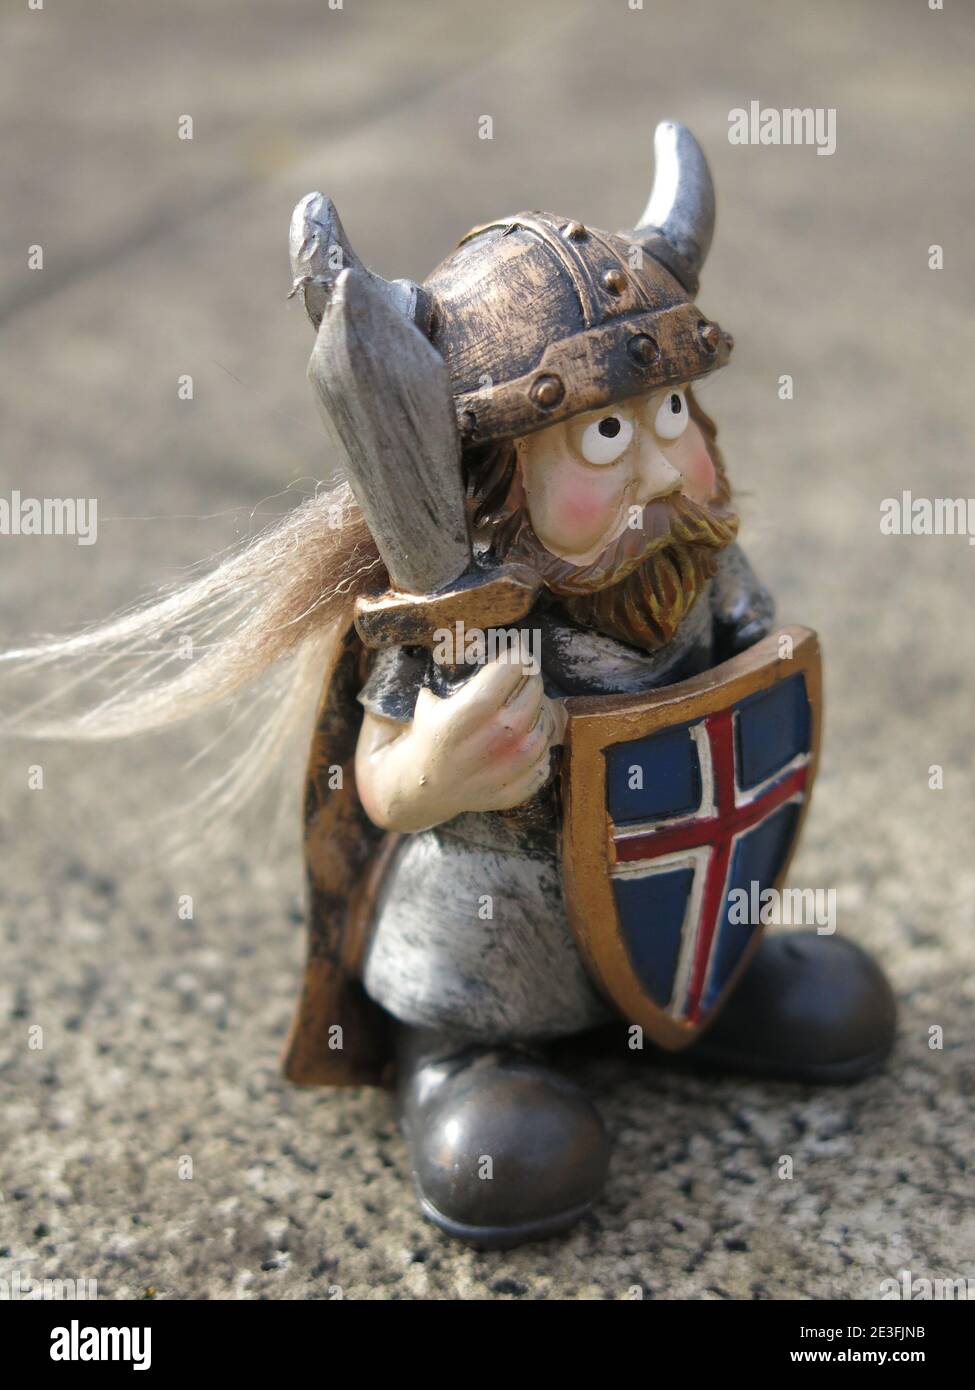 A miniature Viking figure wearing a horned helmet, in battle regalia with a  dagger, and shield with the Icelandic flag Stock Photo - Alamy